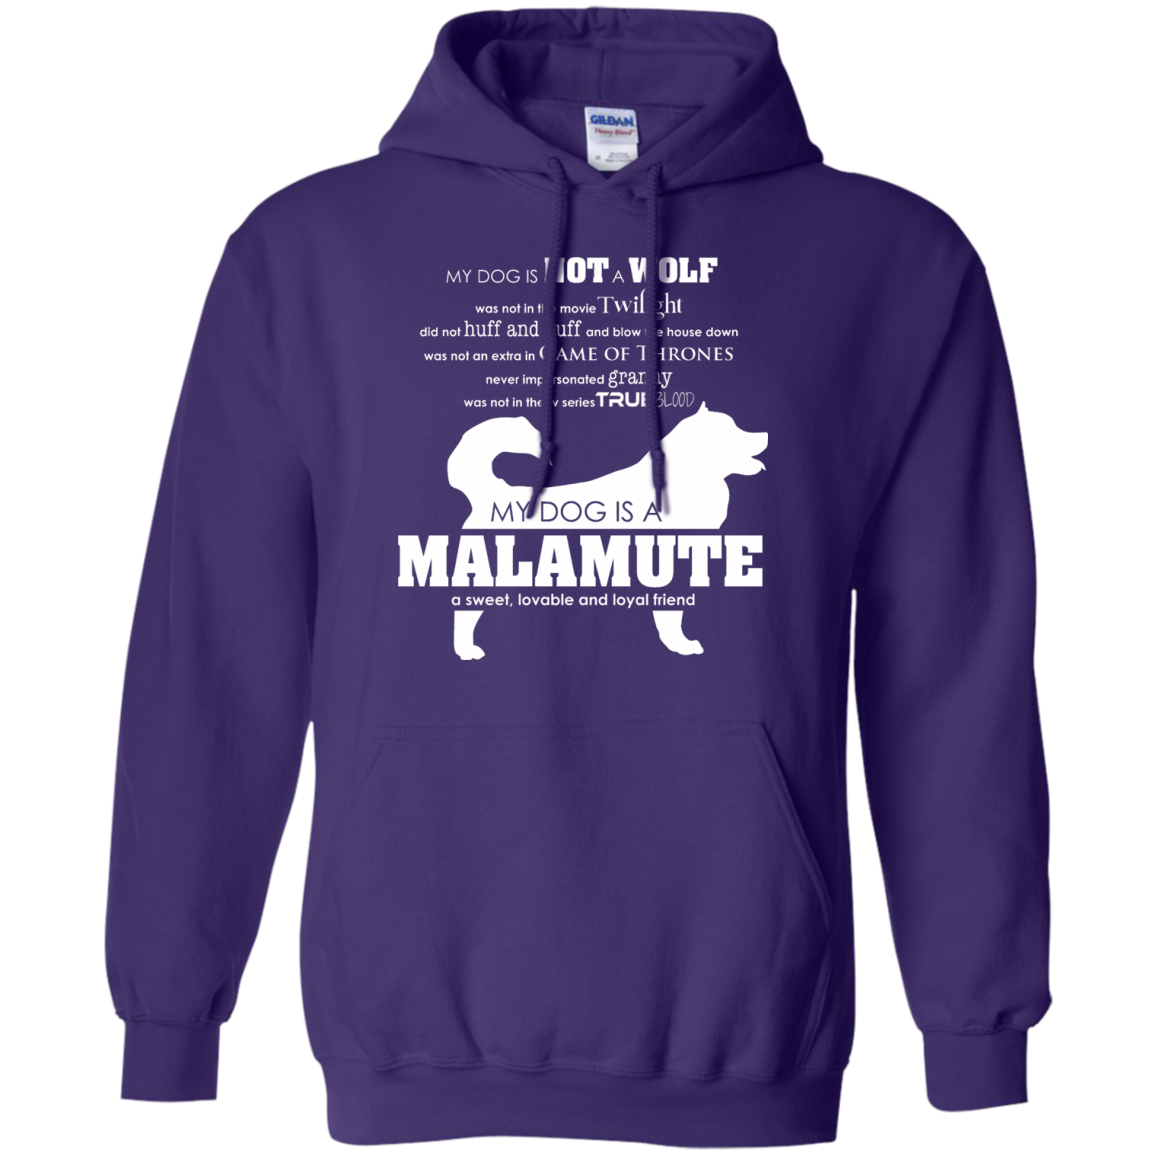 My Dog is Not a Wolf, My Dog is a Malamute - Pullover Hoodie